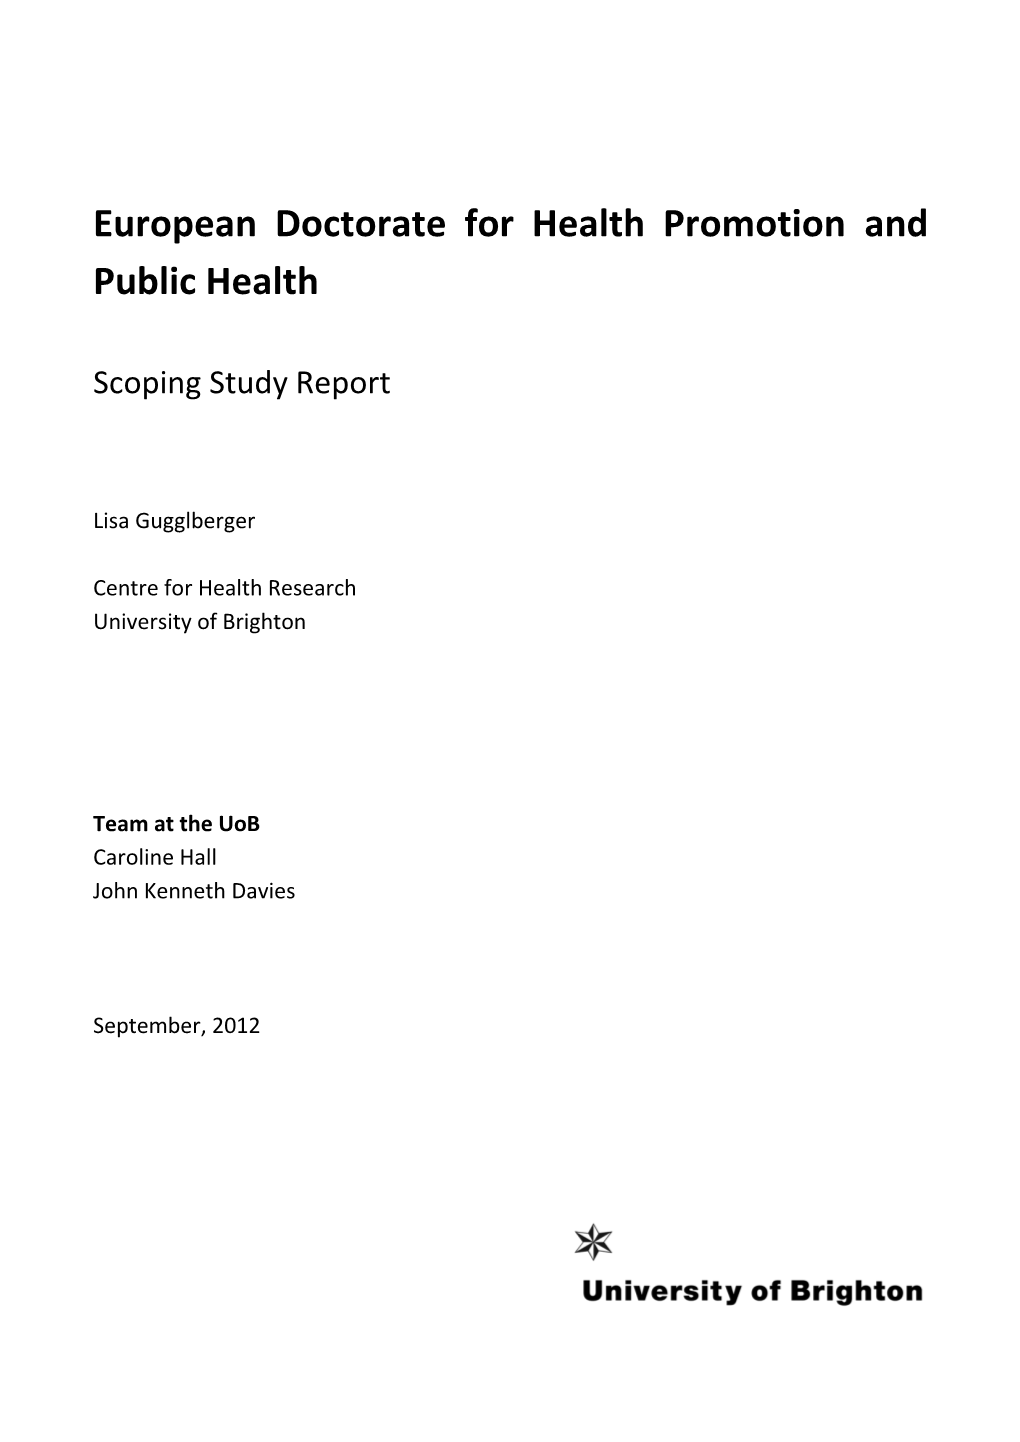 European Doctorate for Health Promotion and Public Health